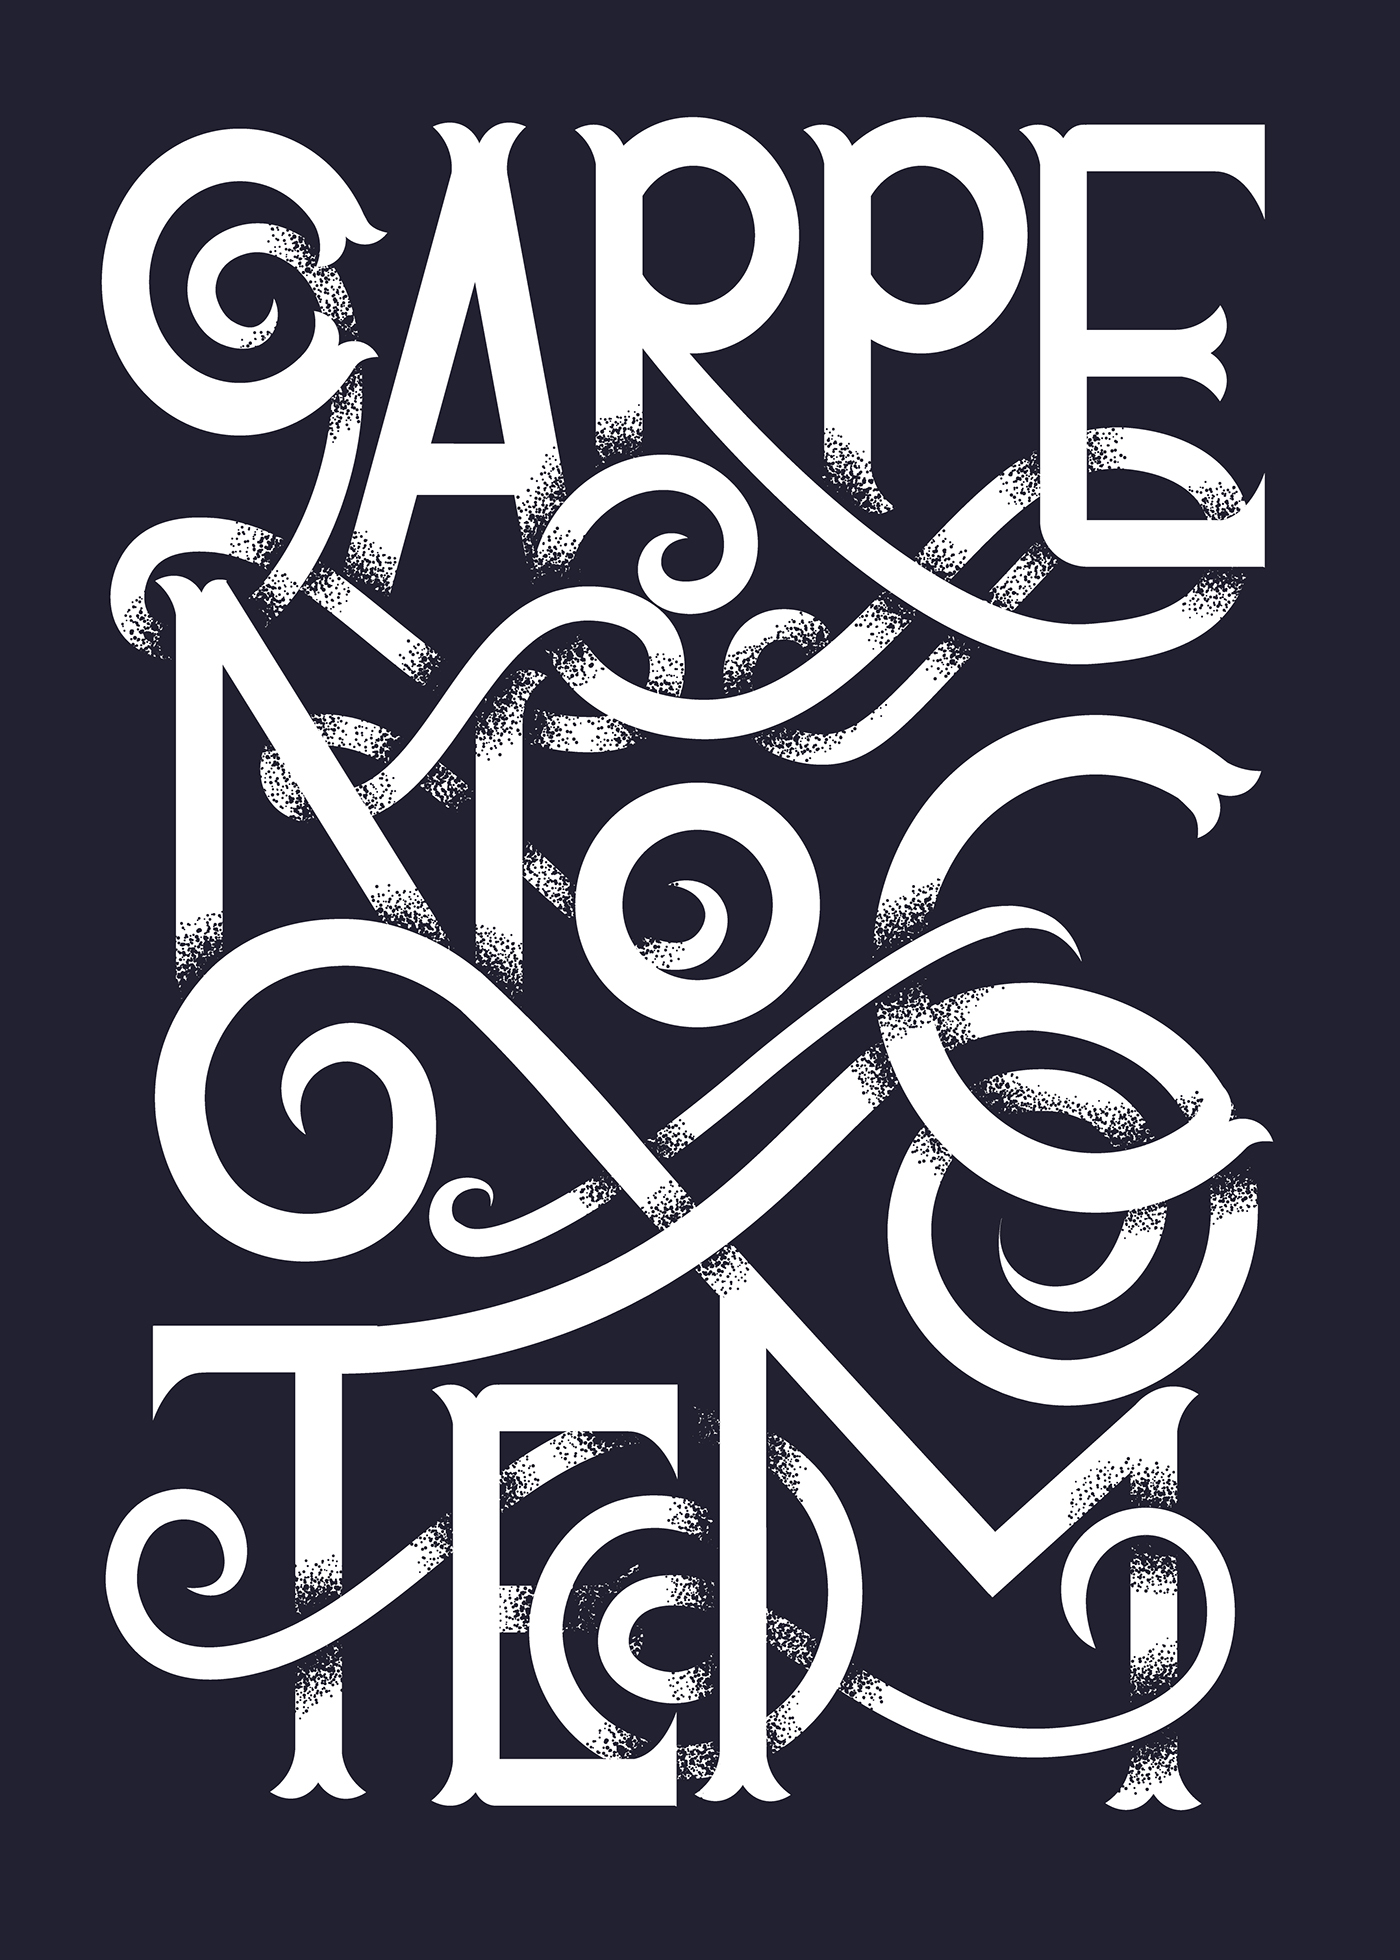 40+ Extremely Creative Typography Designs | Typography | Graphic Design